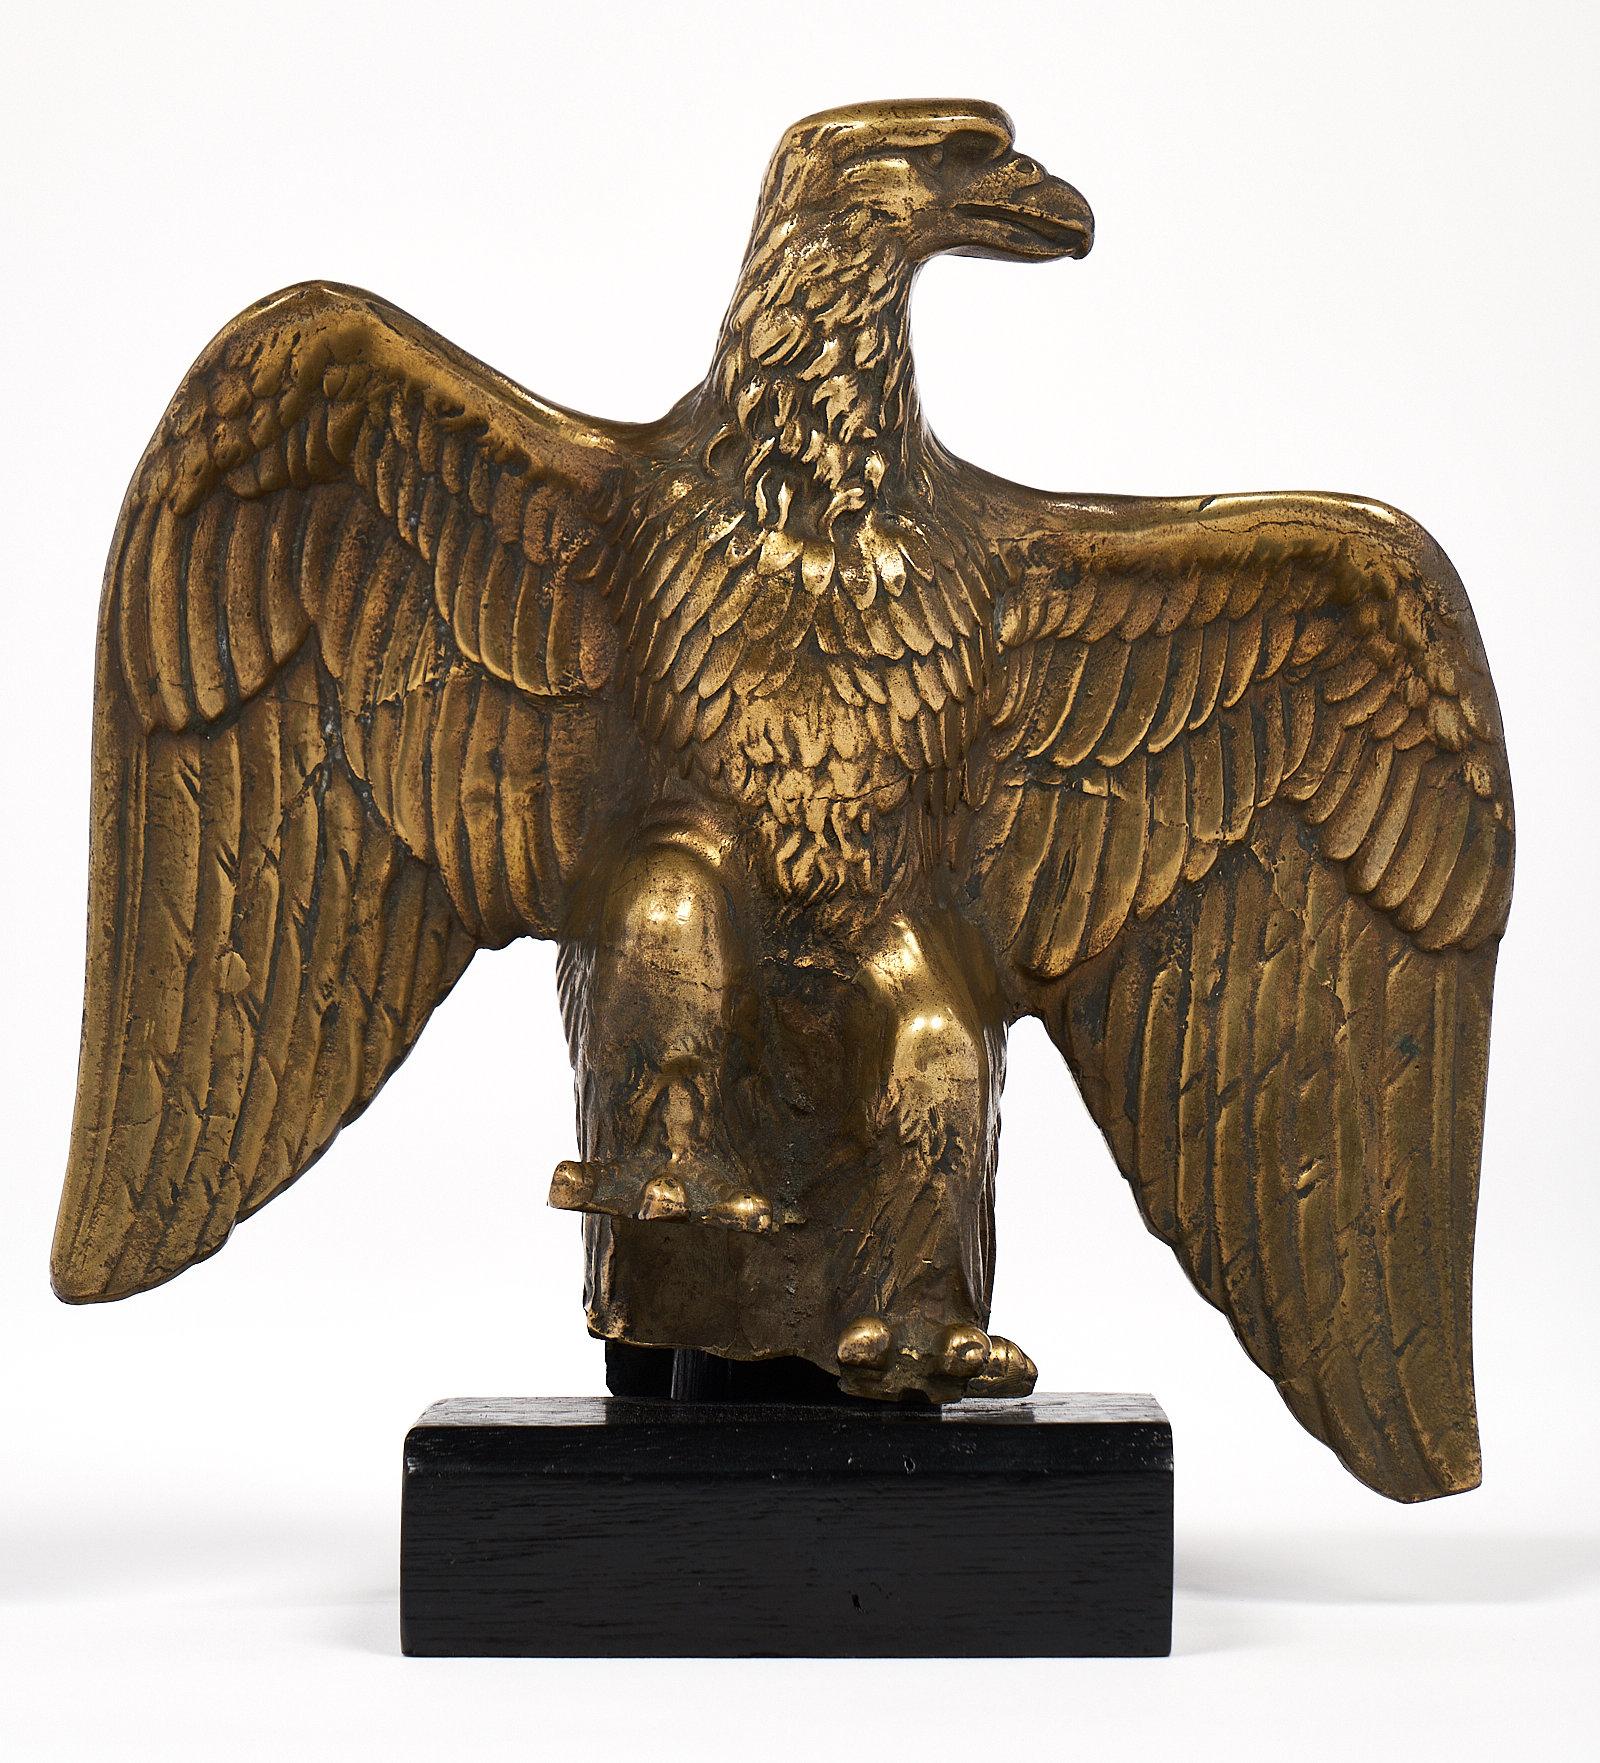 With extended wings, this intricately cast bronze eagle statue has a regal and powerful stance. The piece is supported by a wooden base, and the details on the wings and head on the statue have a beautiful patina from age. This antique decorative